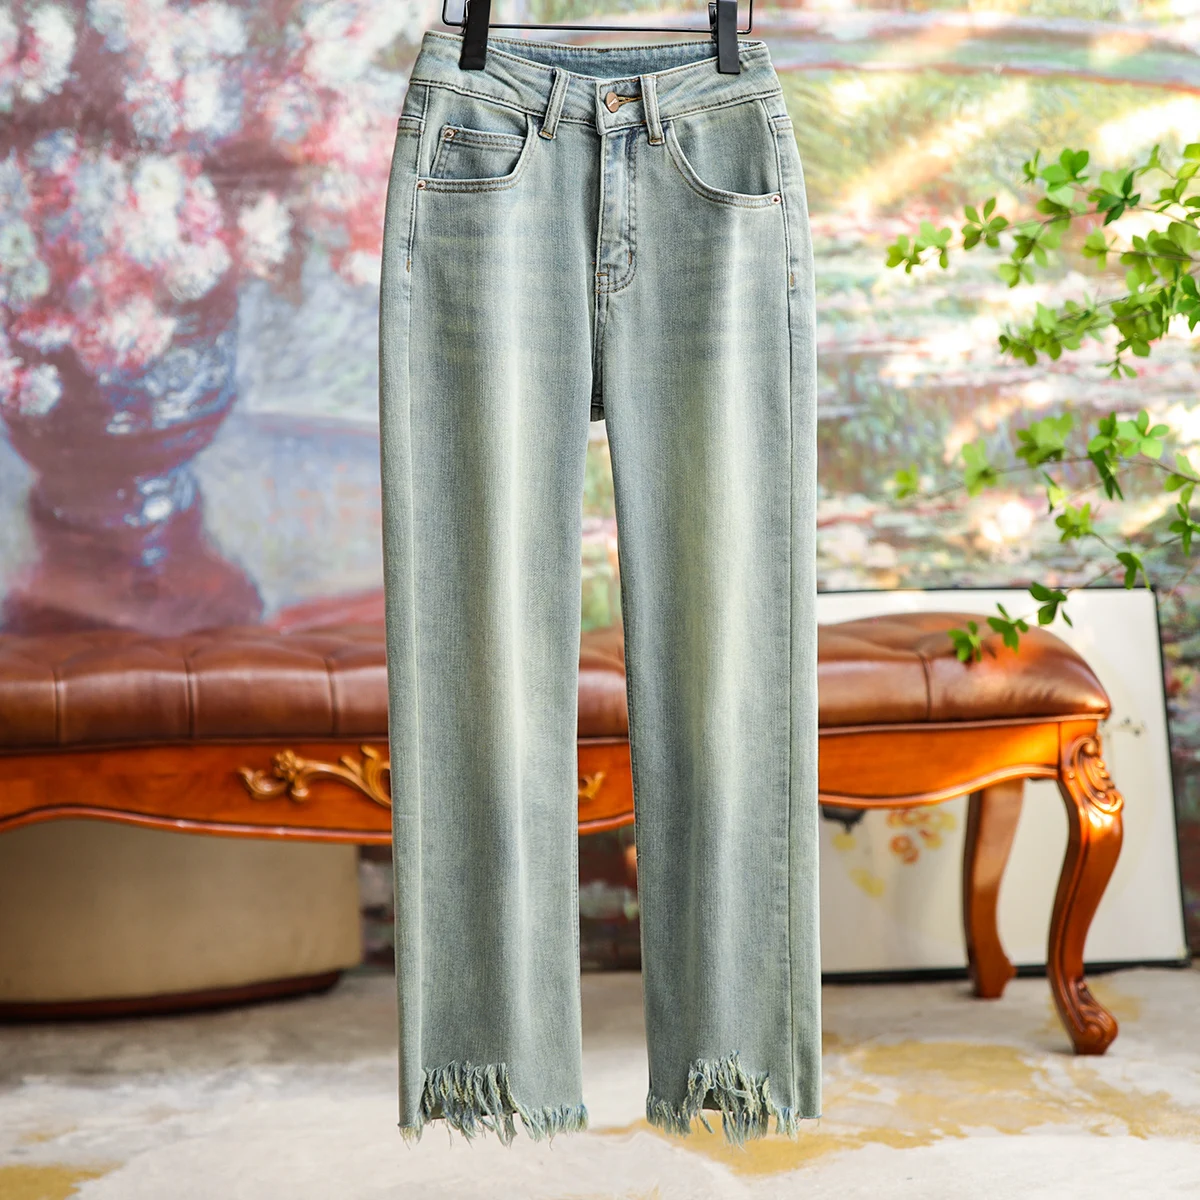 

Temperament Do Old Fringe 9 Points Jeans Women's Fashion Casual Commuter Pants Slim Solid Elegant High Street Trousers Clothing